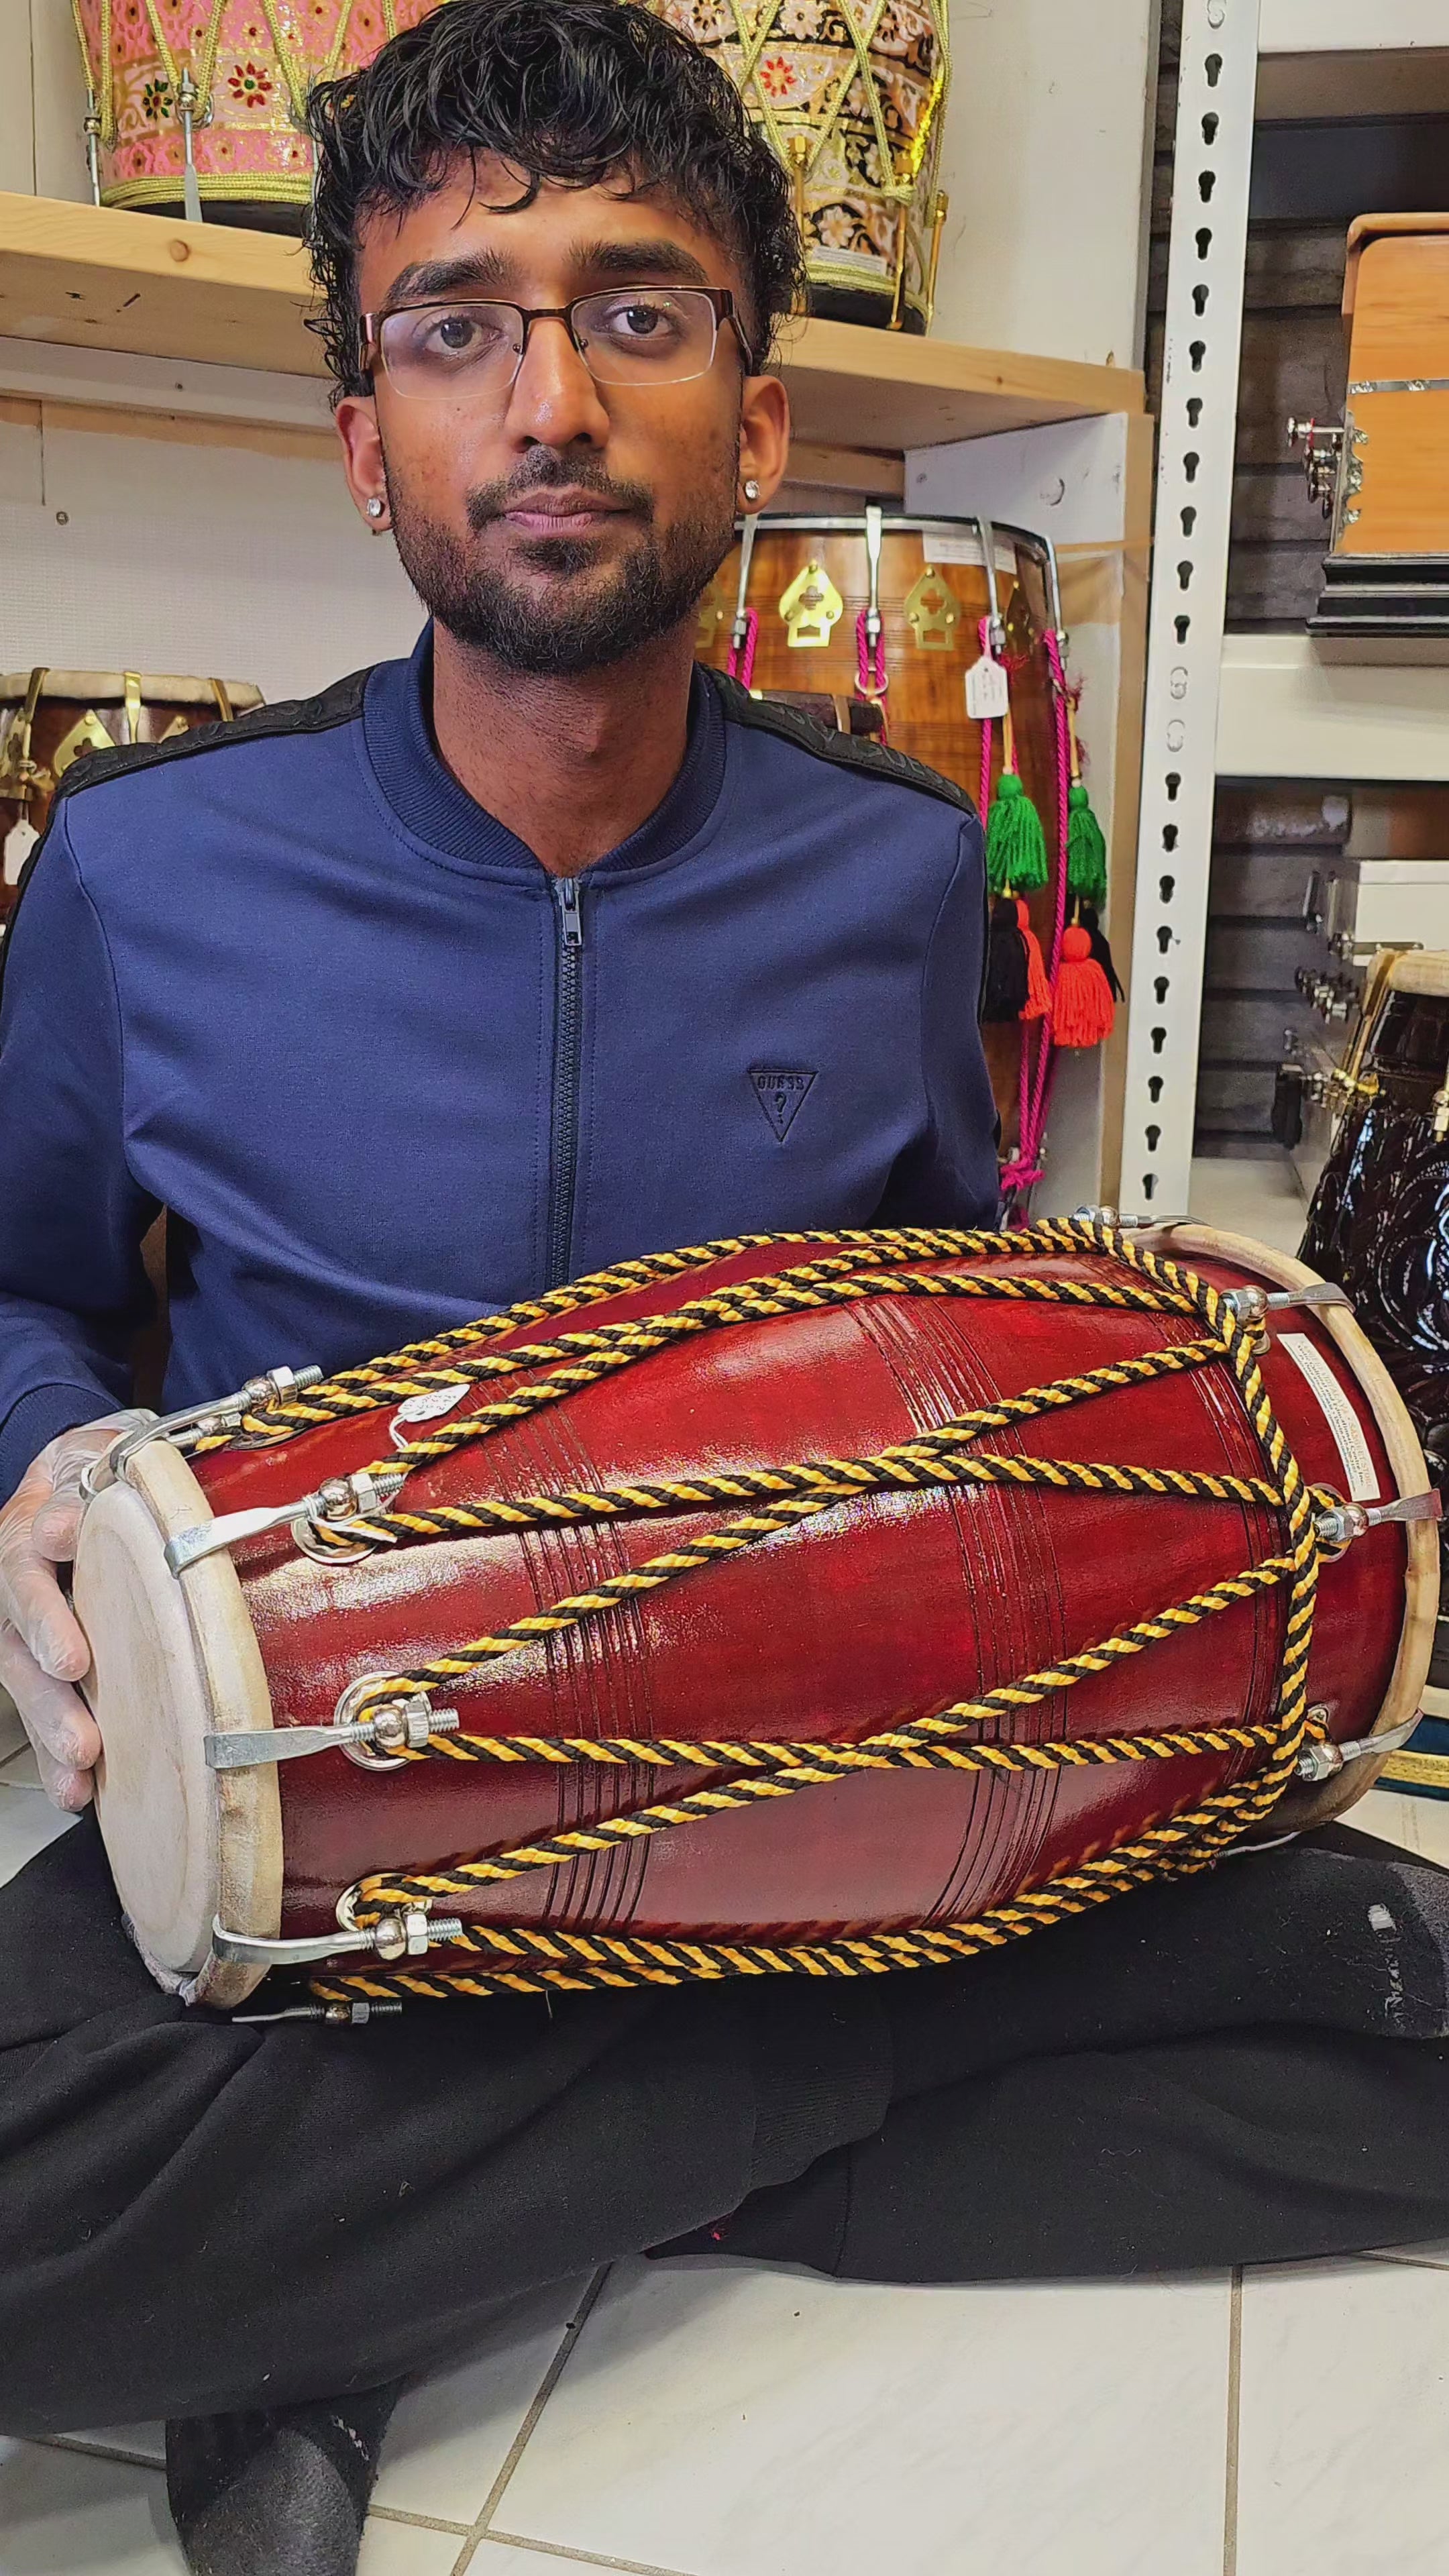 The HoneyComb Harmony Dholak - A Burgundy Professional Mango Wood Dholak with Yellow and Black Ropes, Chrome Bolts, and a Handle!